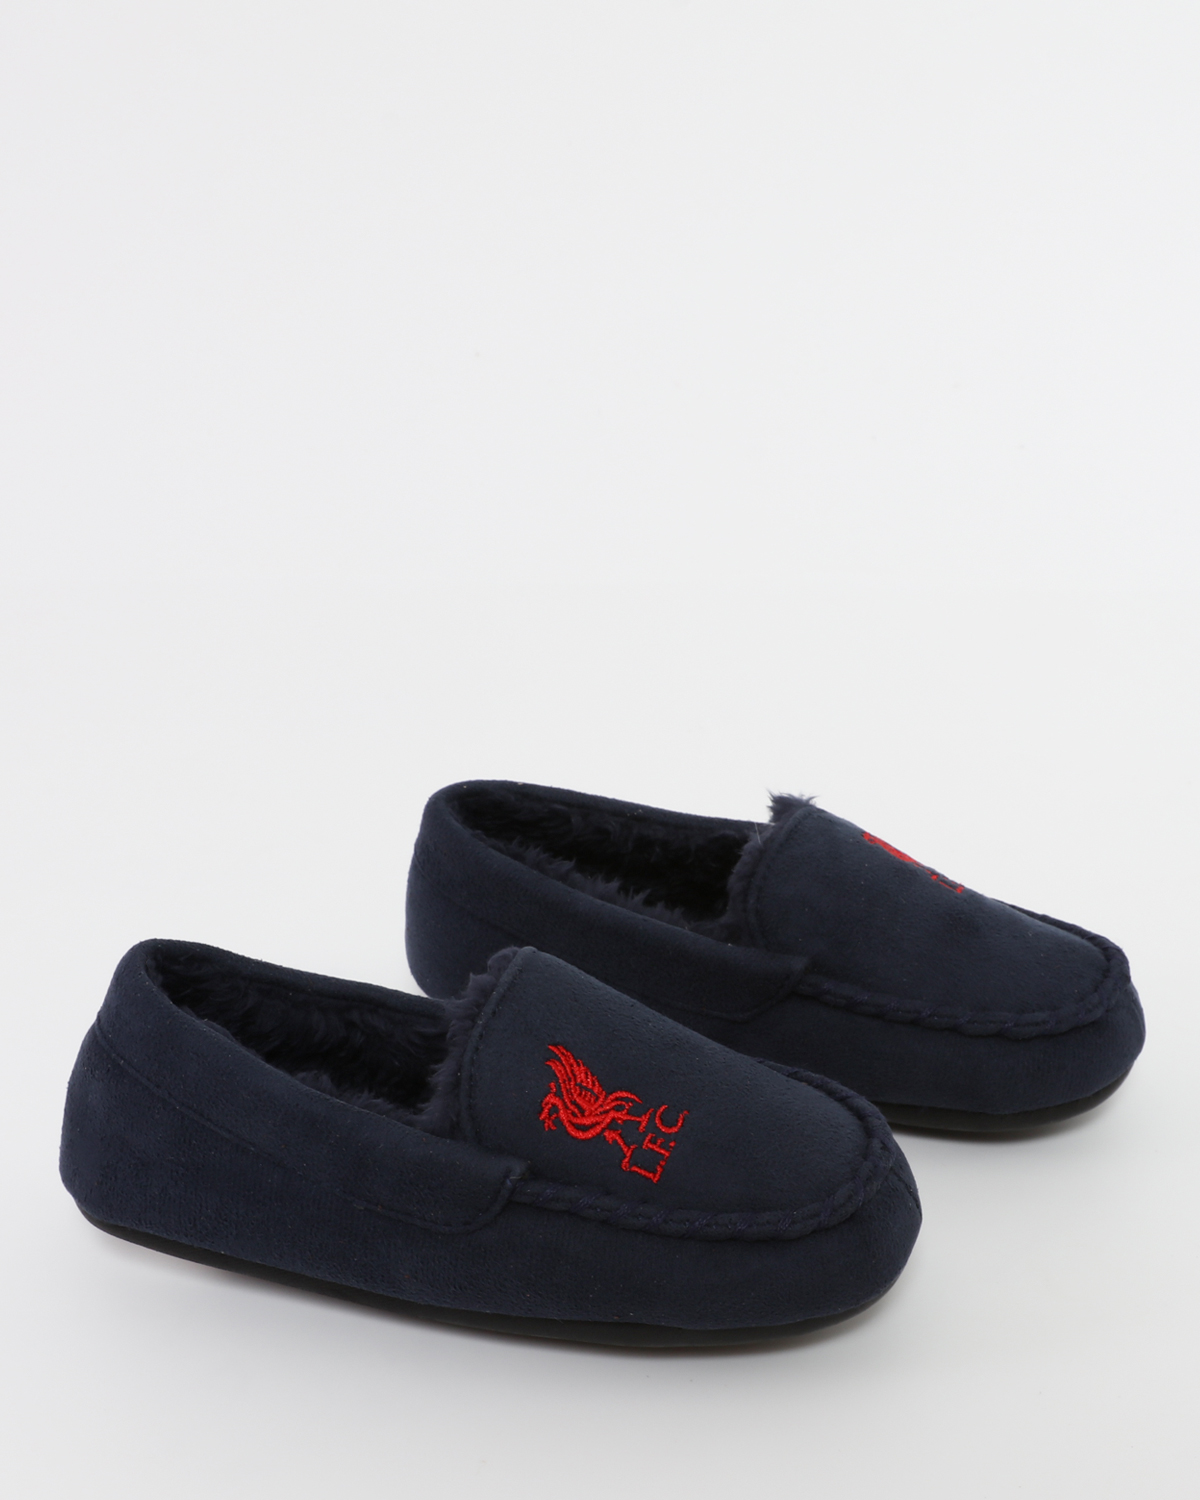 liverpool moccasin slippers